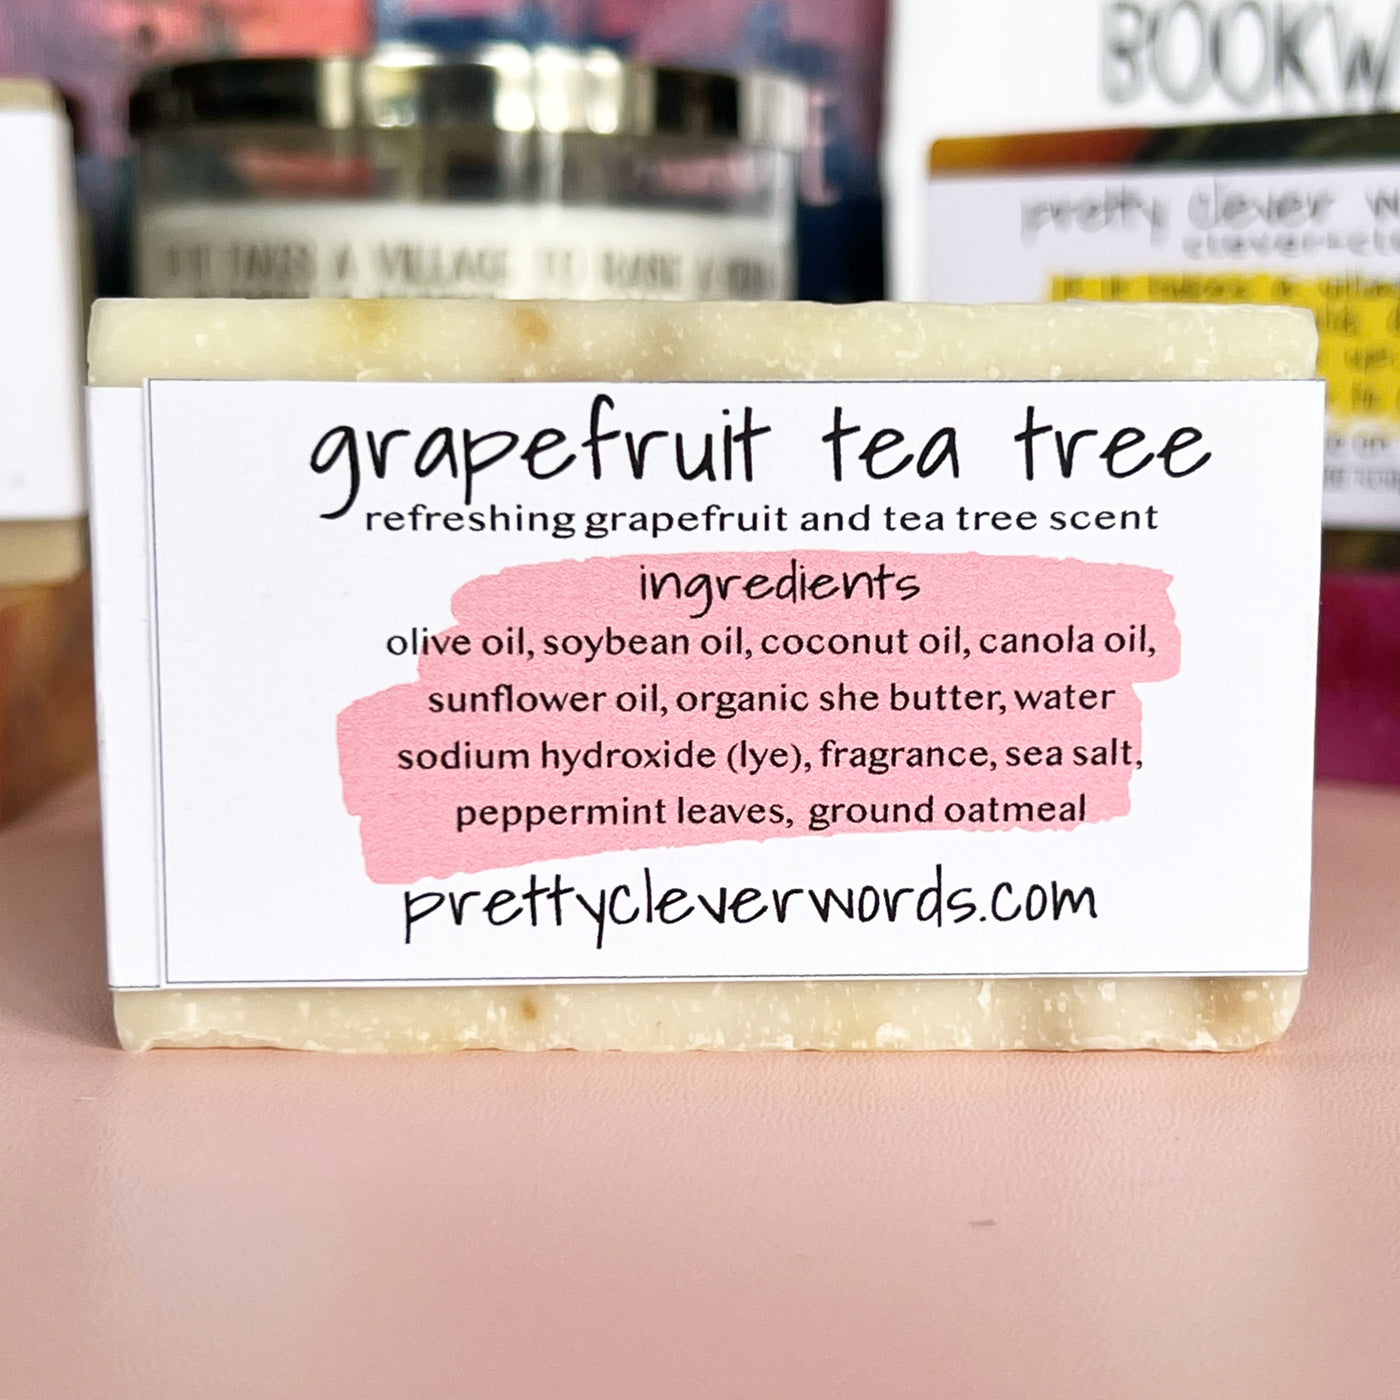 clever+clean grapefruit tea tree bar soap - yet, you're still talking